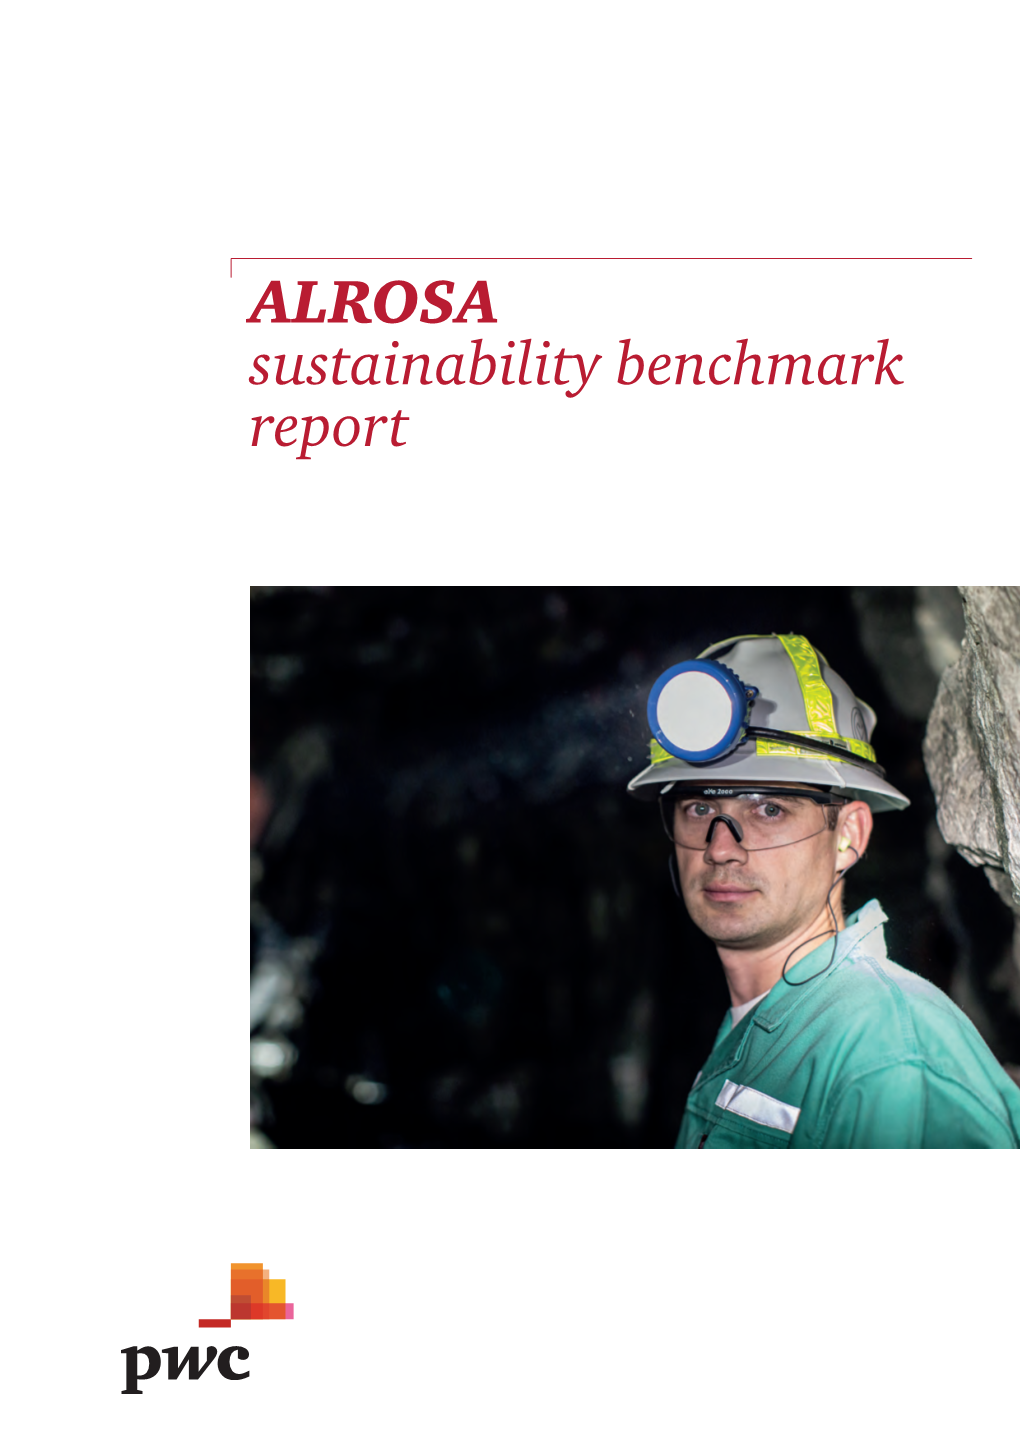 ALROSA Sustainability Benchmark Report Contents